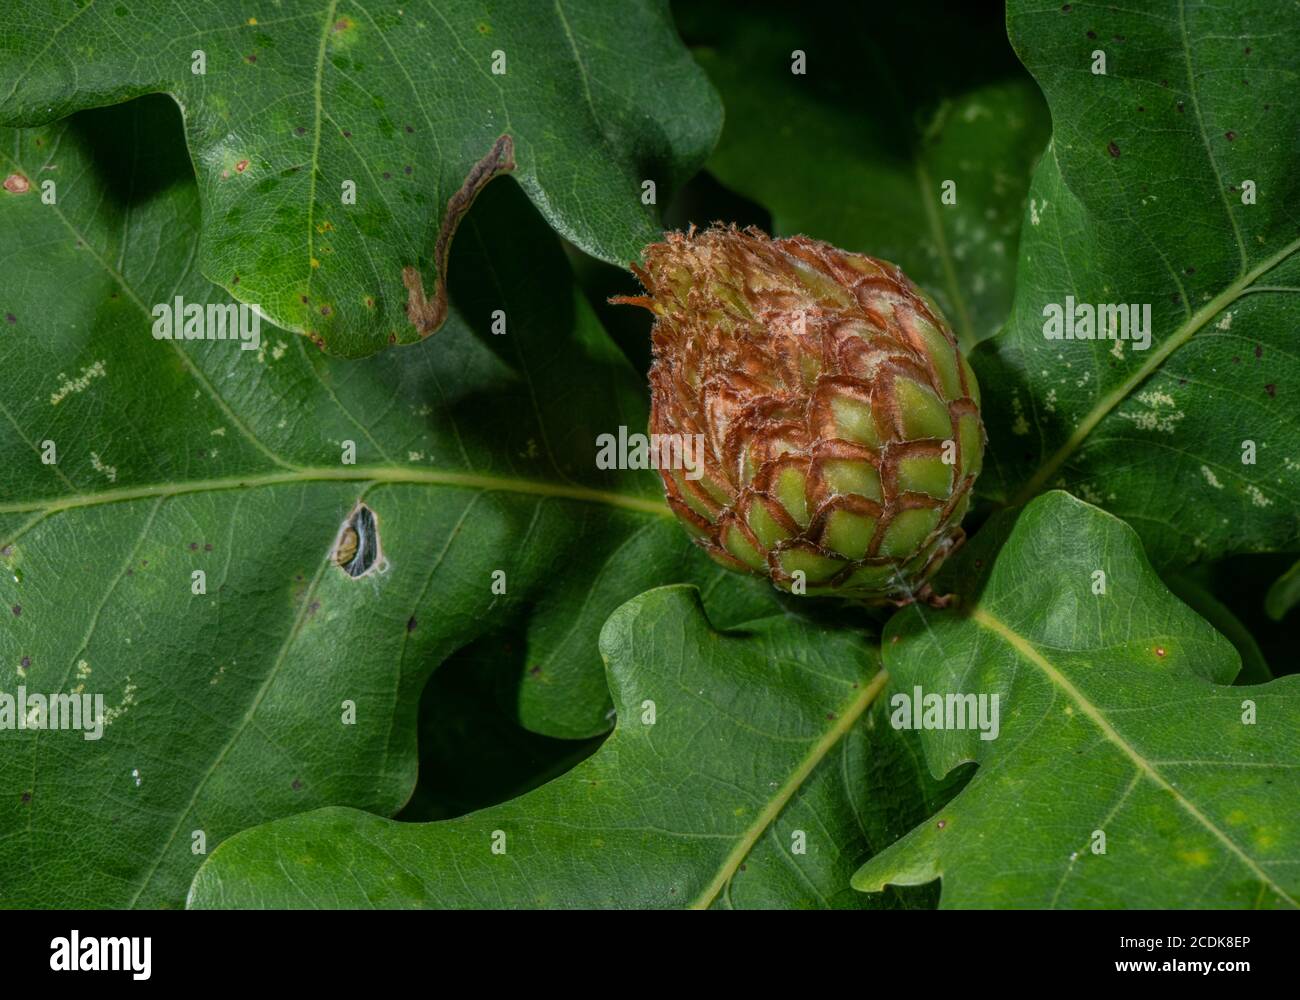 Artichoke Gall , Andricus foecundatrix, on the bud of Common Oak, Quercus robur. Caused by a gall-wasp. Stock Photo